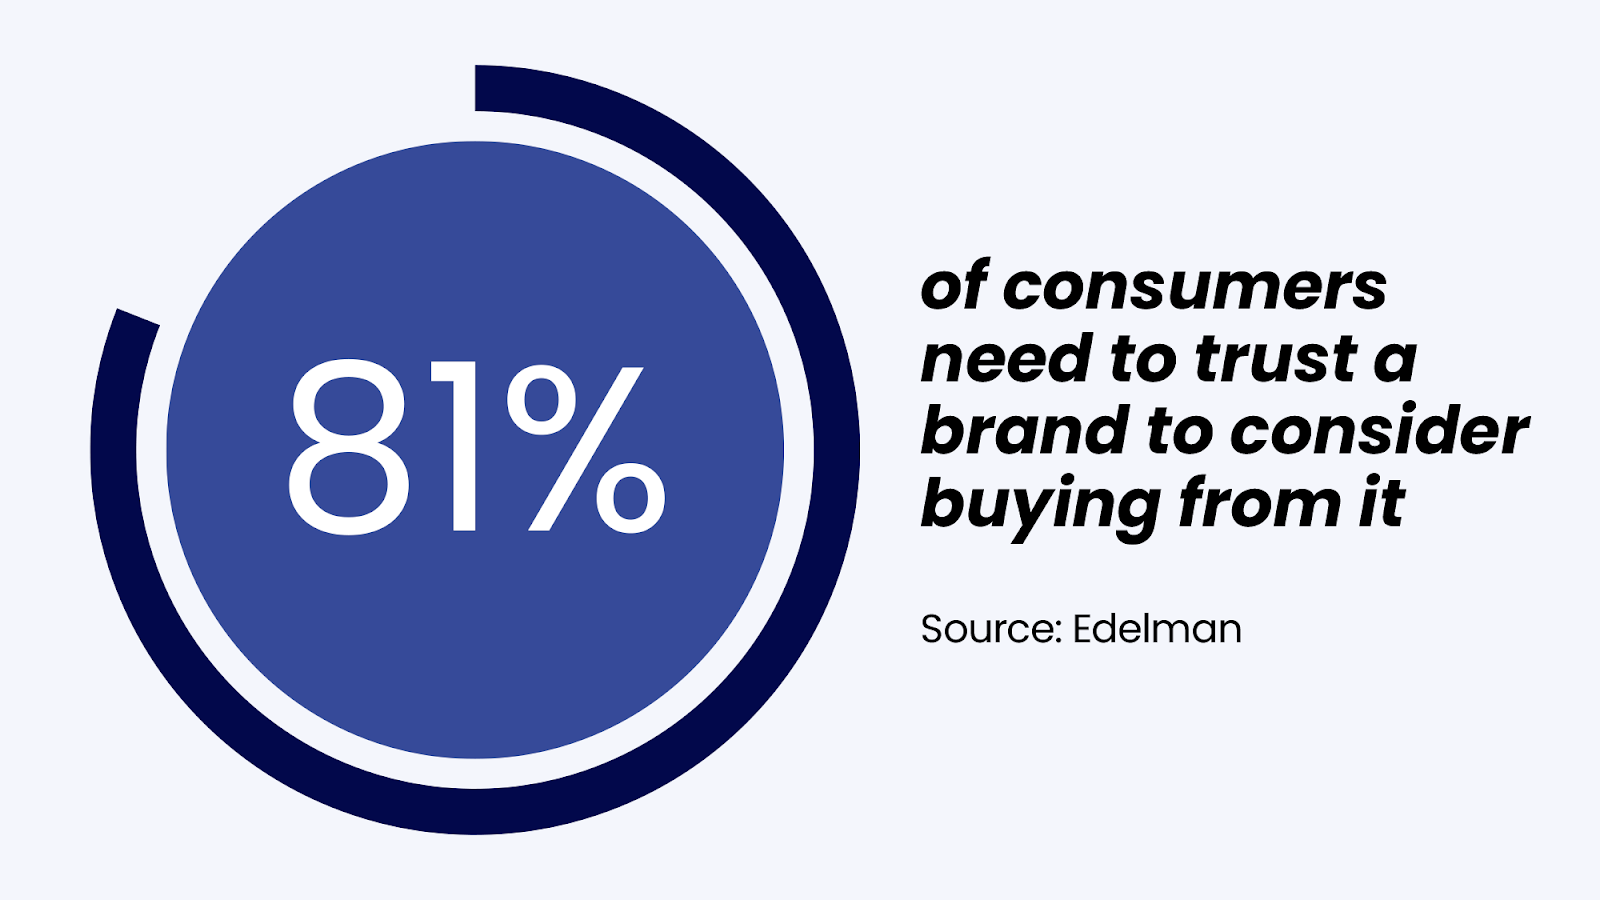 81% of consumers need to trust a brand to consider buying from it